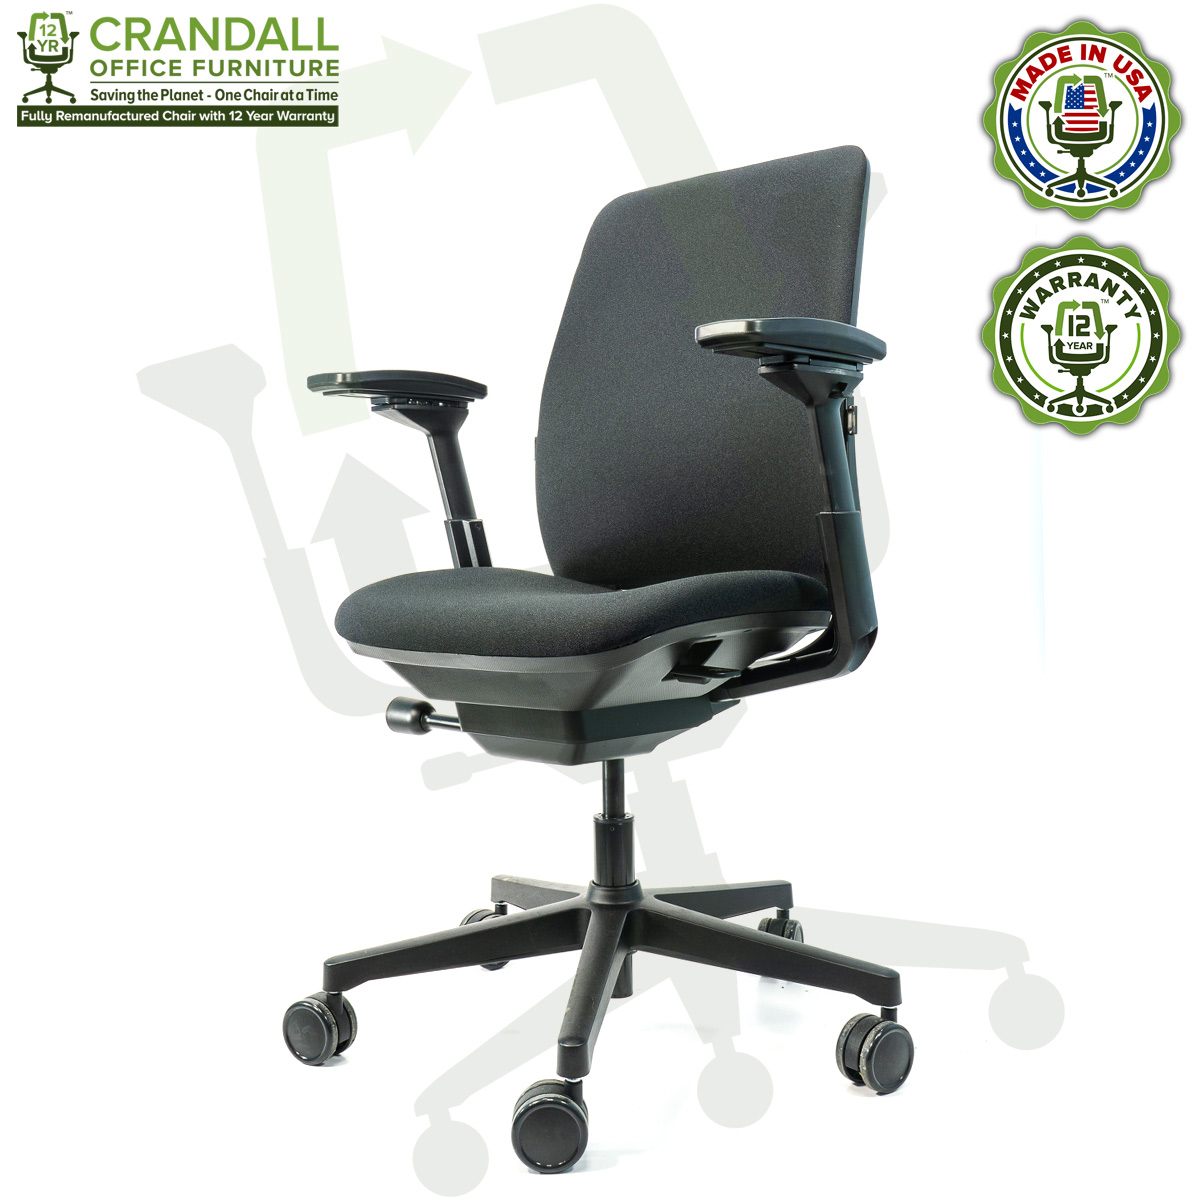 Crandall Office Furniture Remanufactured Steelcase Amia Chair with 12 Year Warranty - 02